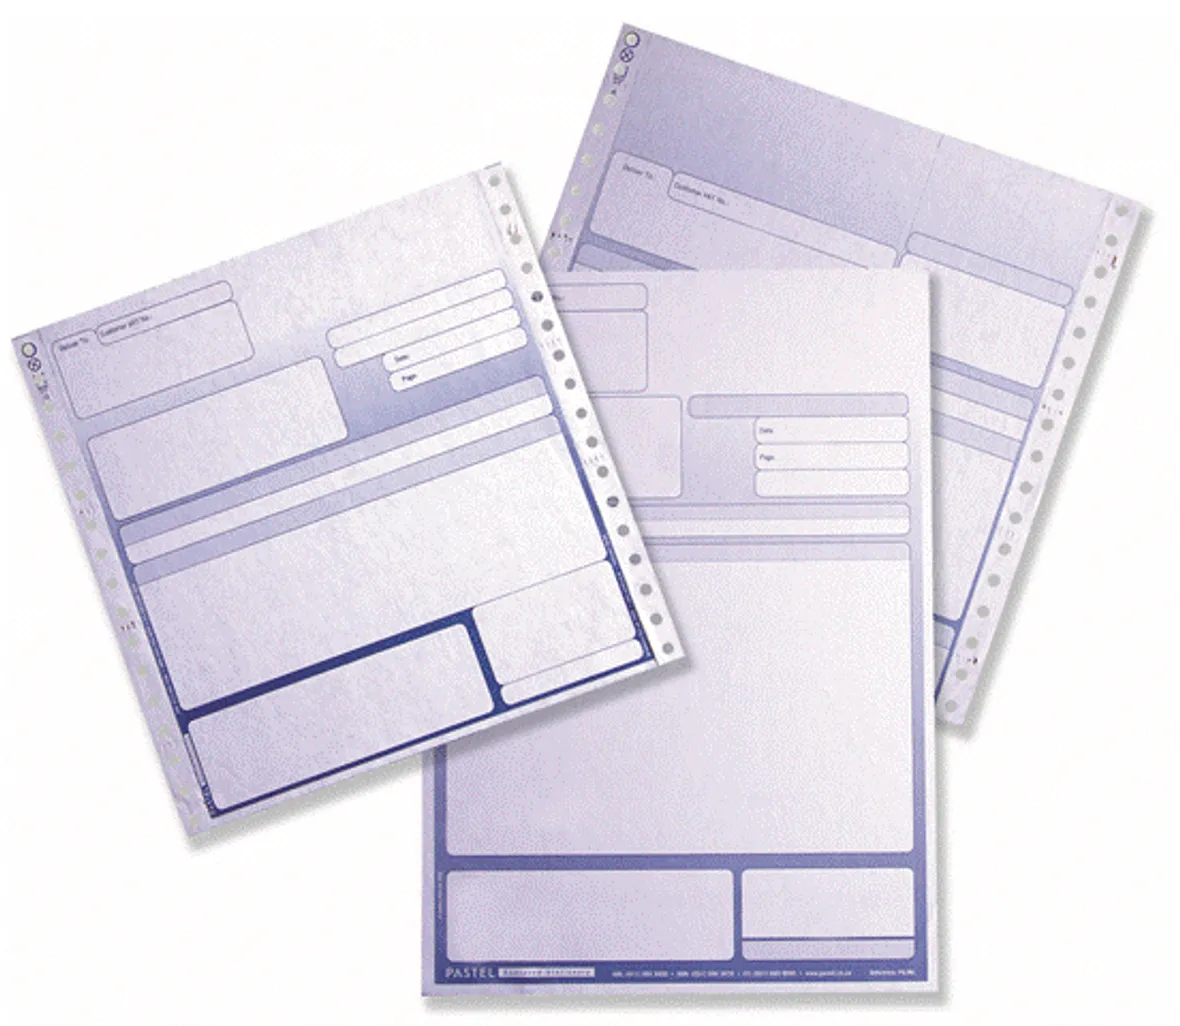 continuous feed paper